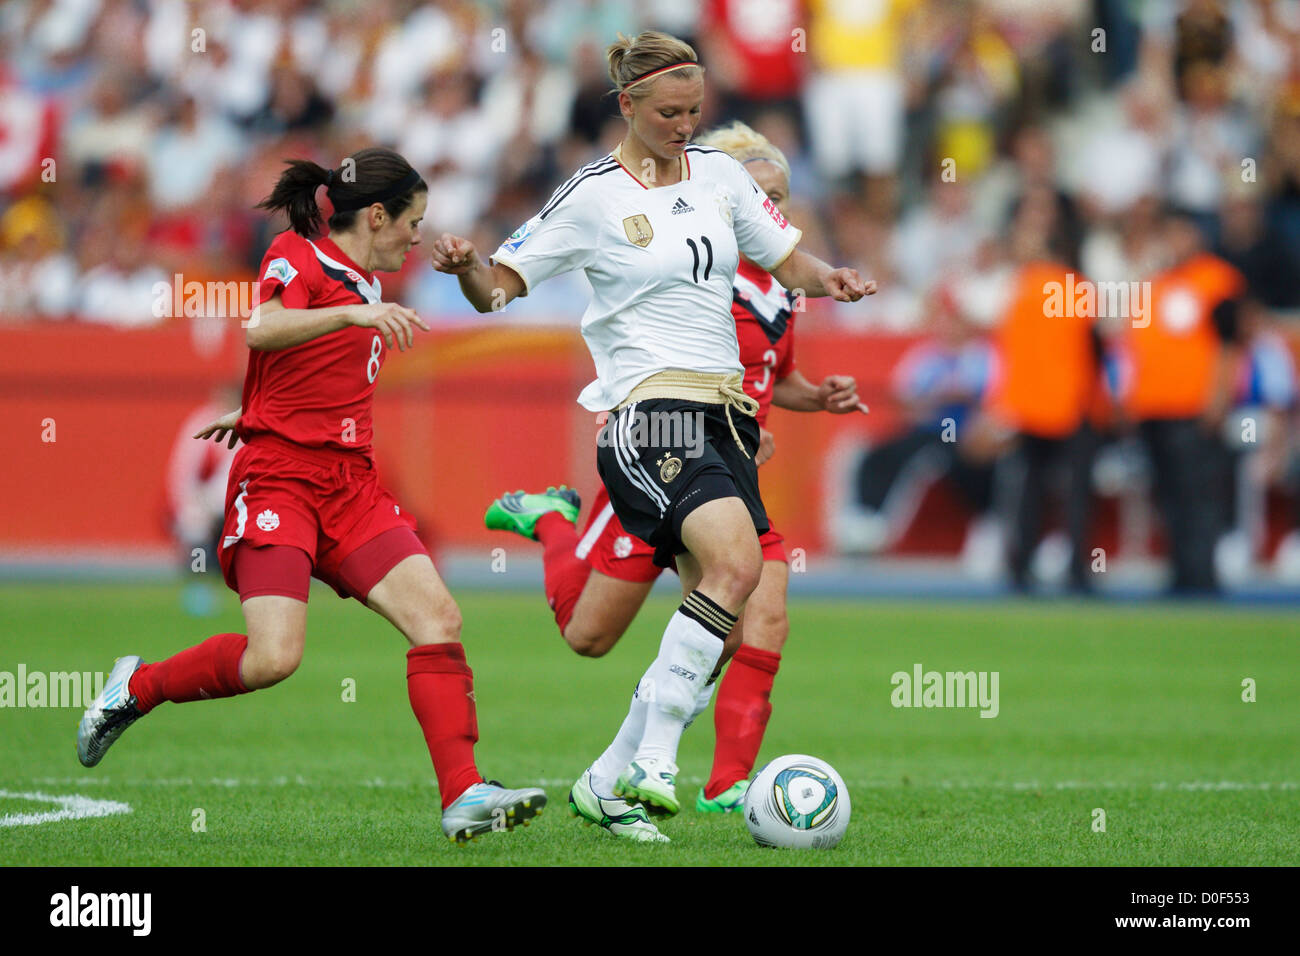 Alexandra Popp of Germany (11) attacks against Canada during the opening match of the FIFA Women's World Cup soccer tournament. Stock Photo